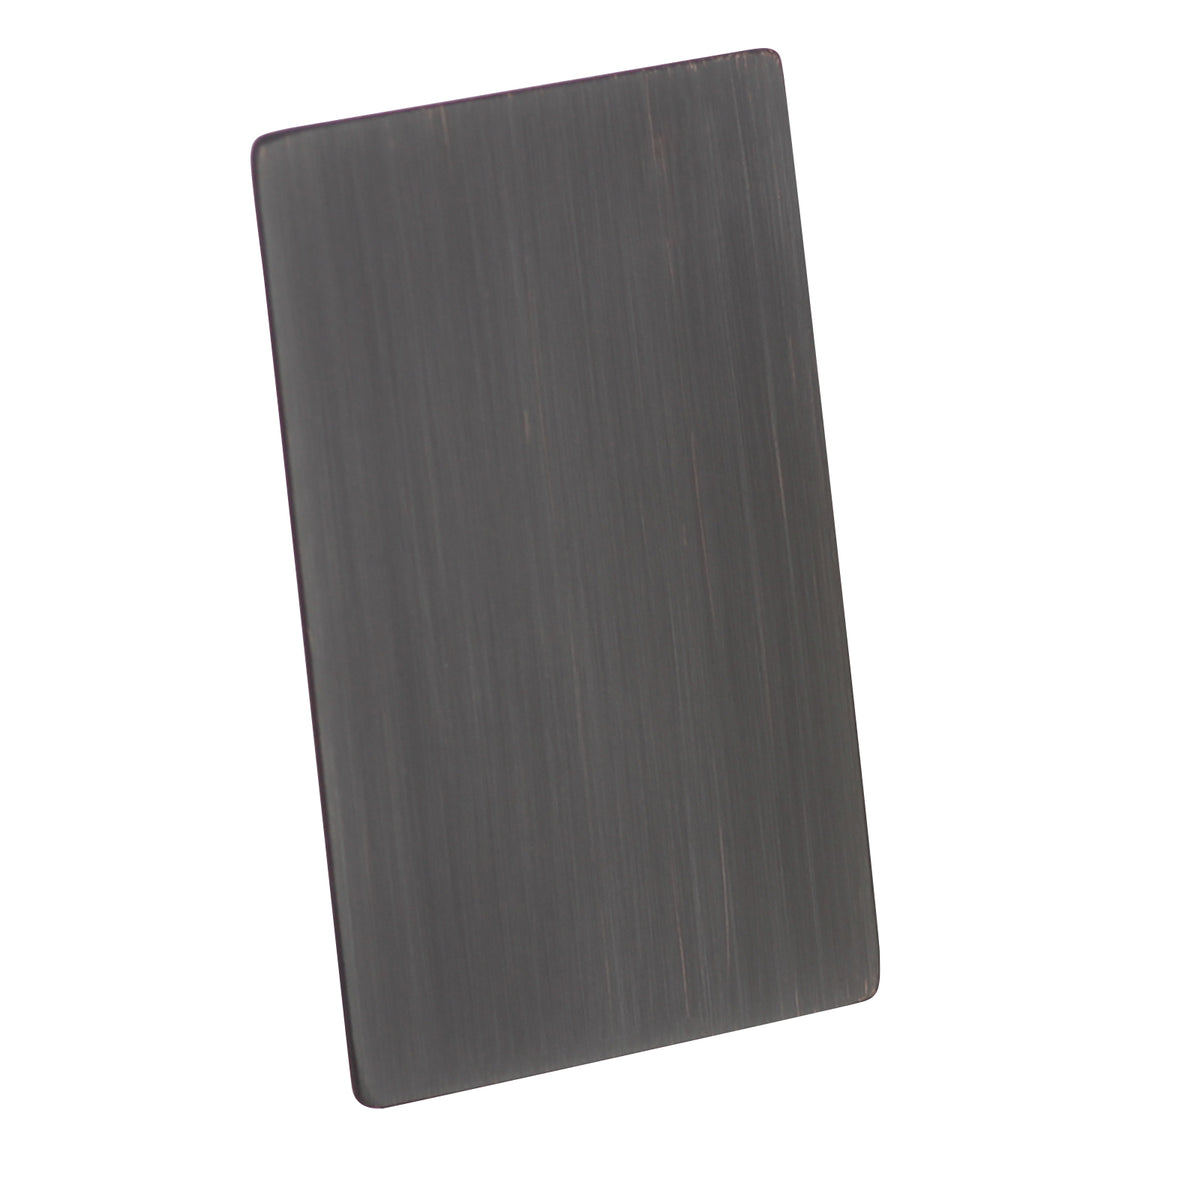 Akicon Oil Rubbed Bronze Stainless Steel Sample